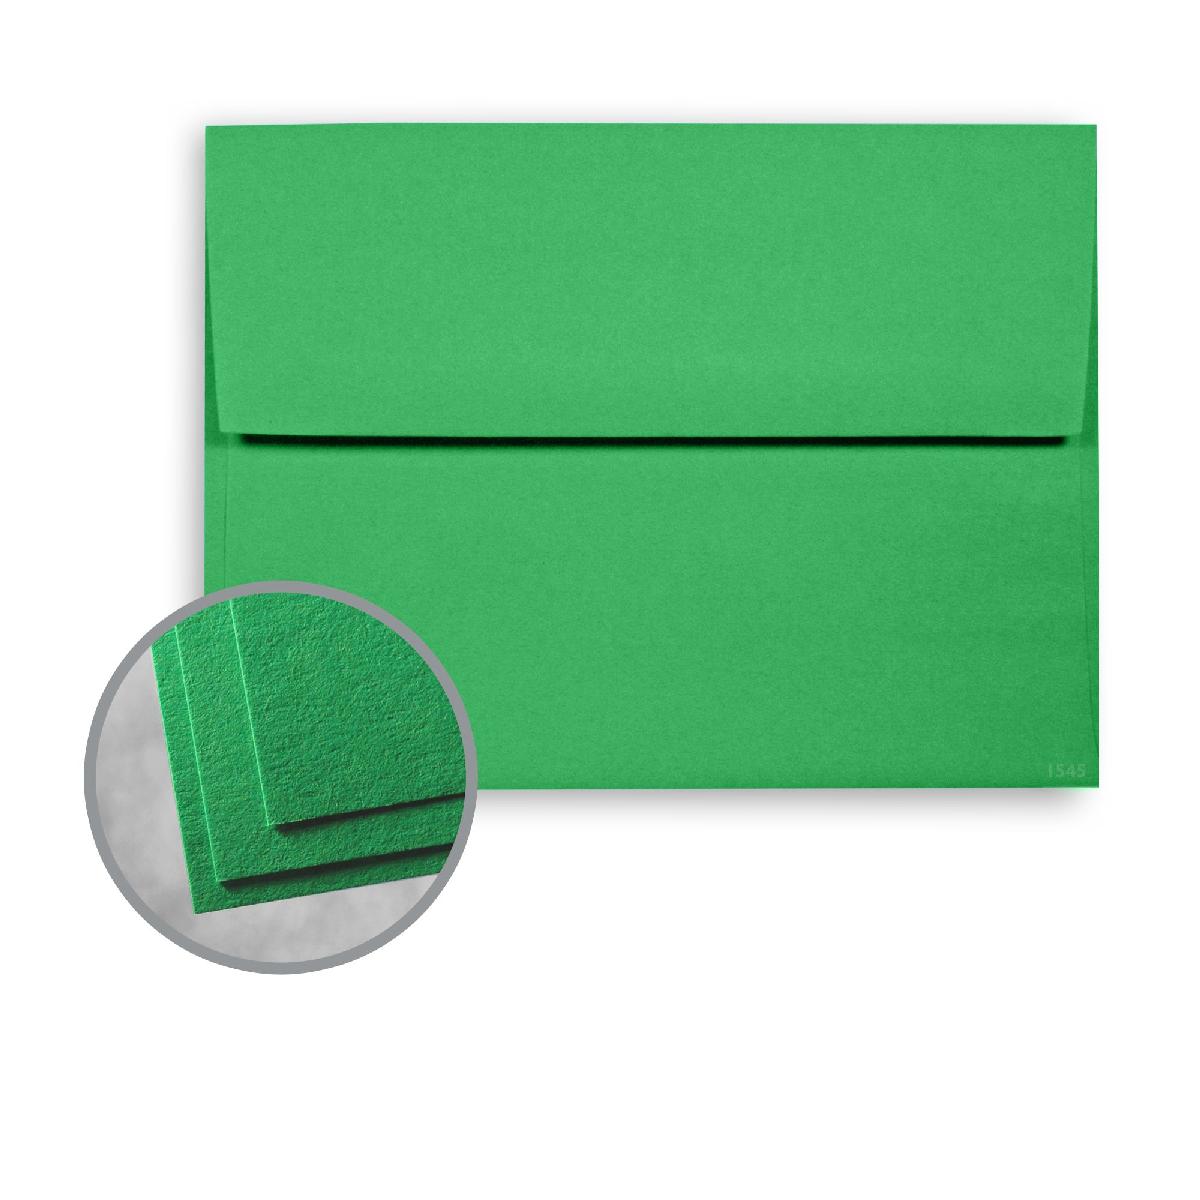 Wausau Paper® Astrobrights Gamma Green Smooth 60# A-2 Announcement Envelopes 250